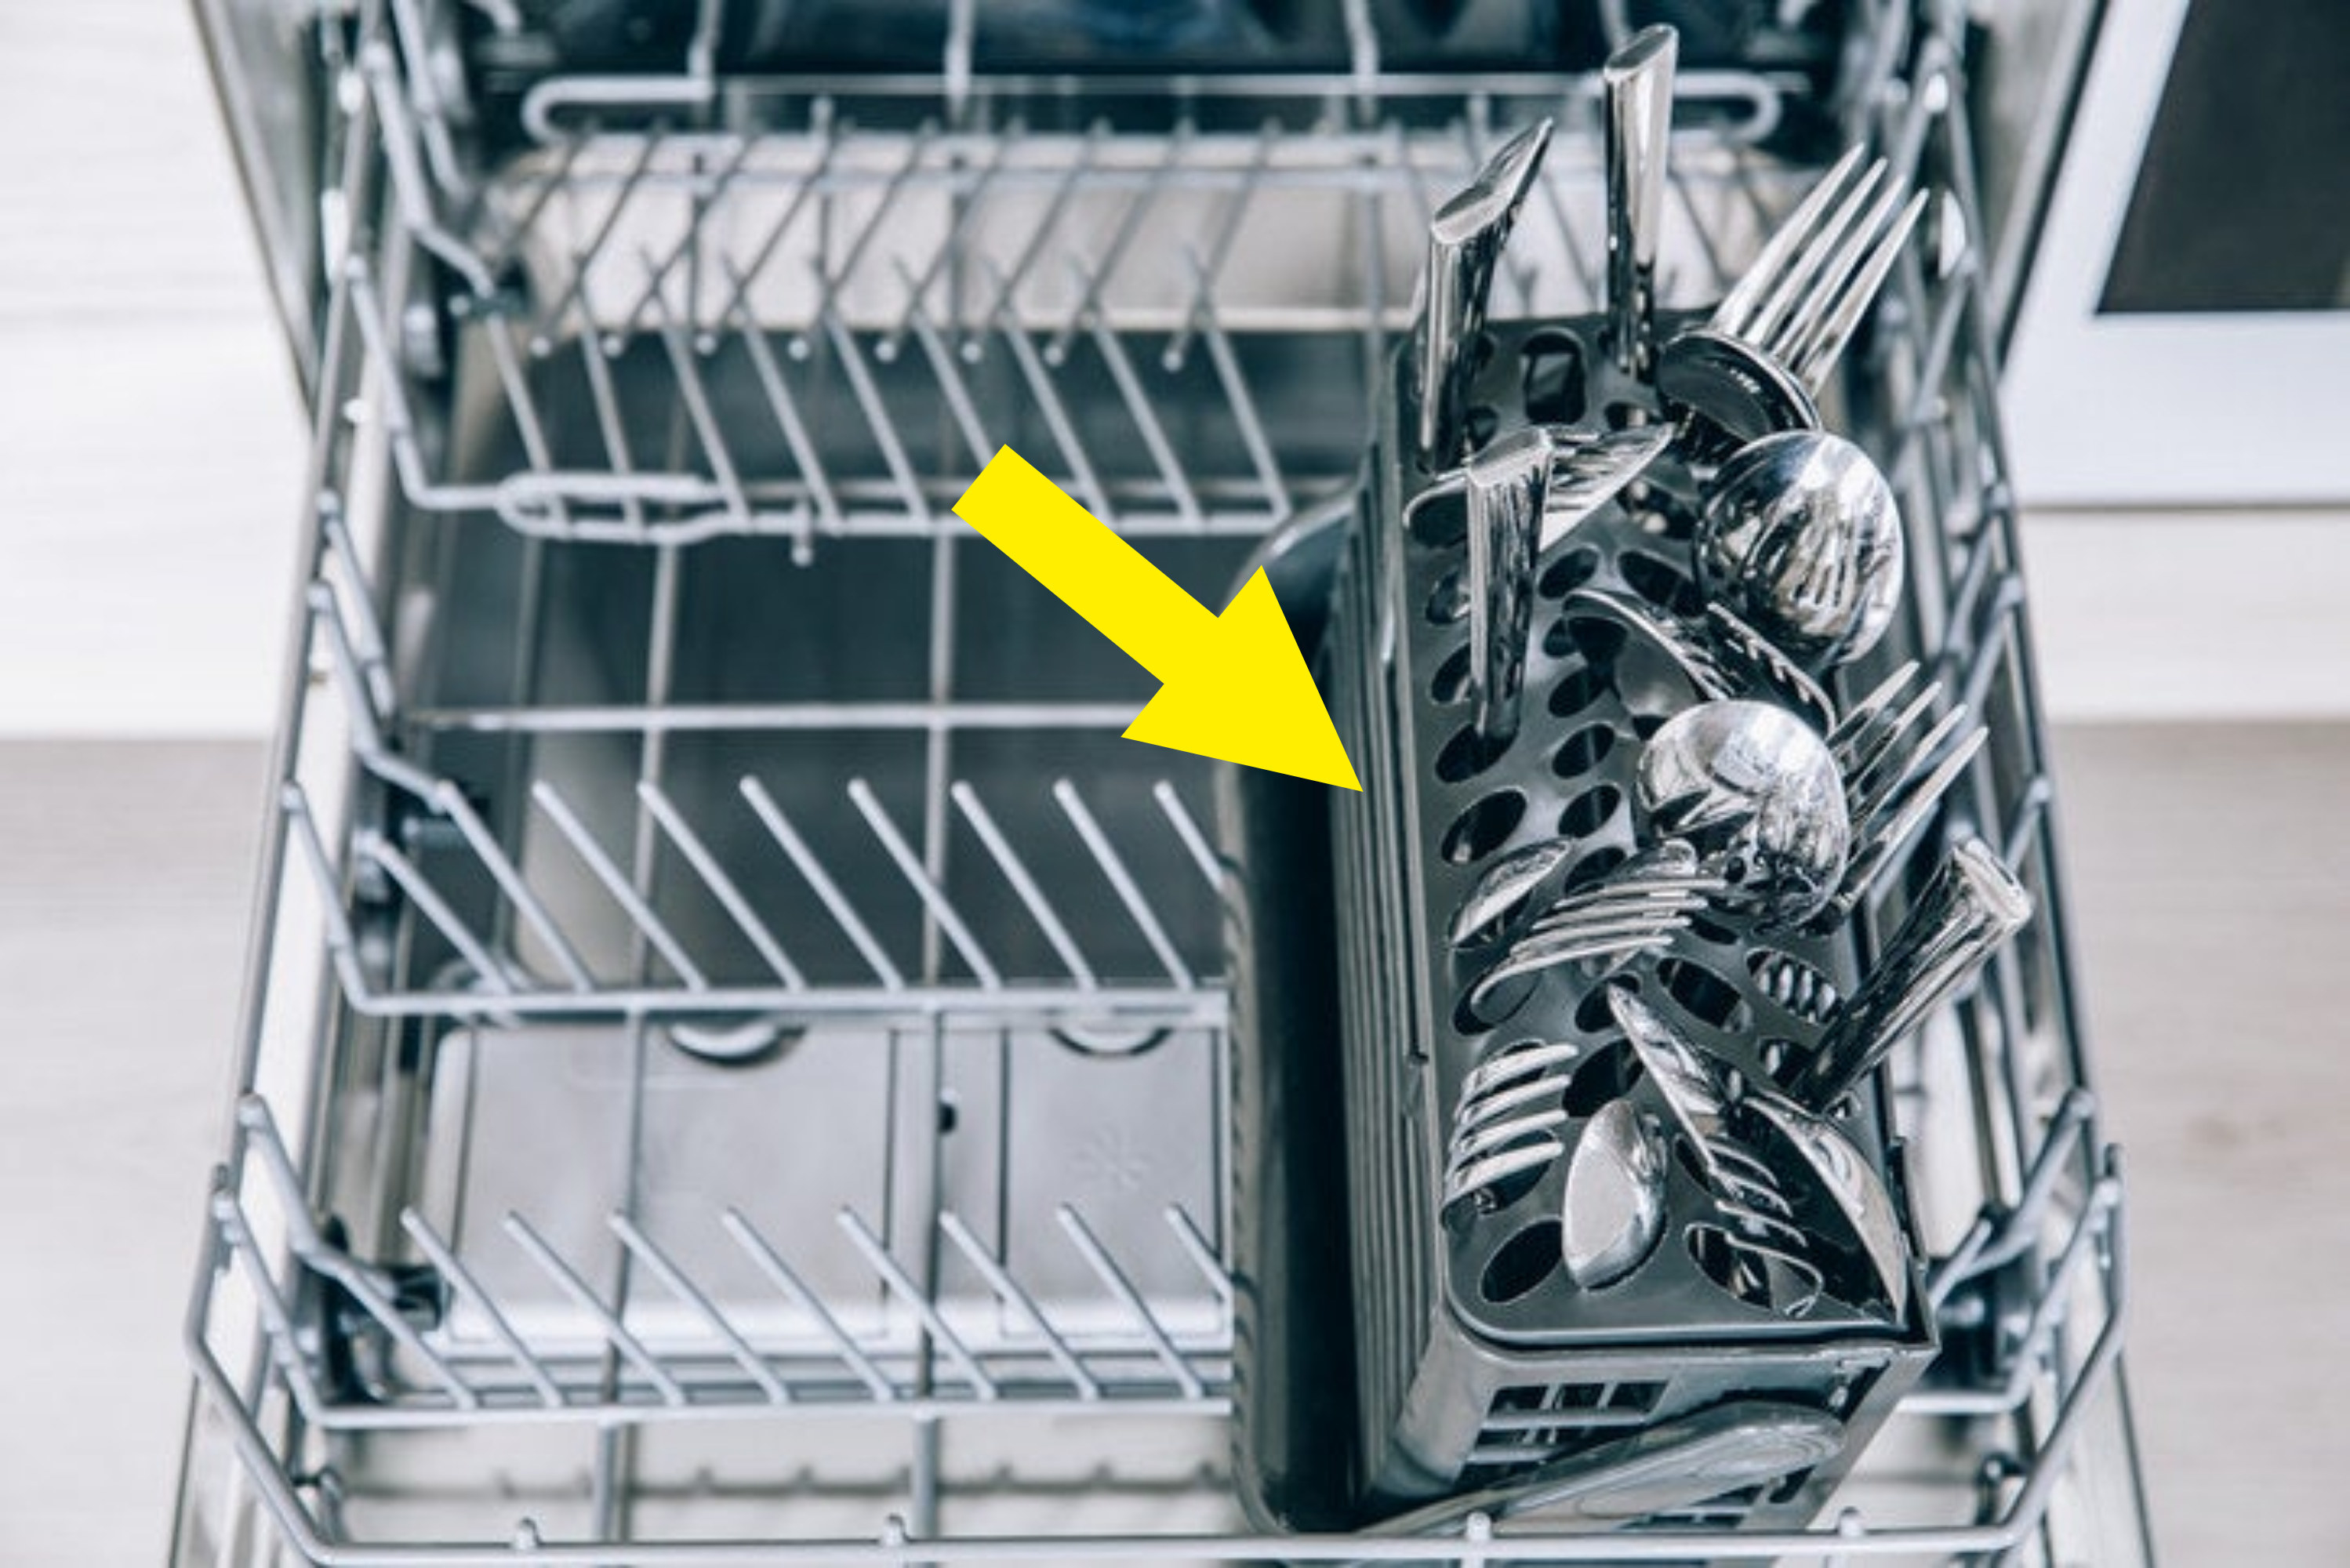 the utensils in the dishwasher